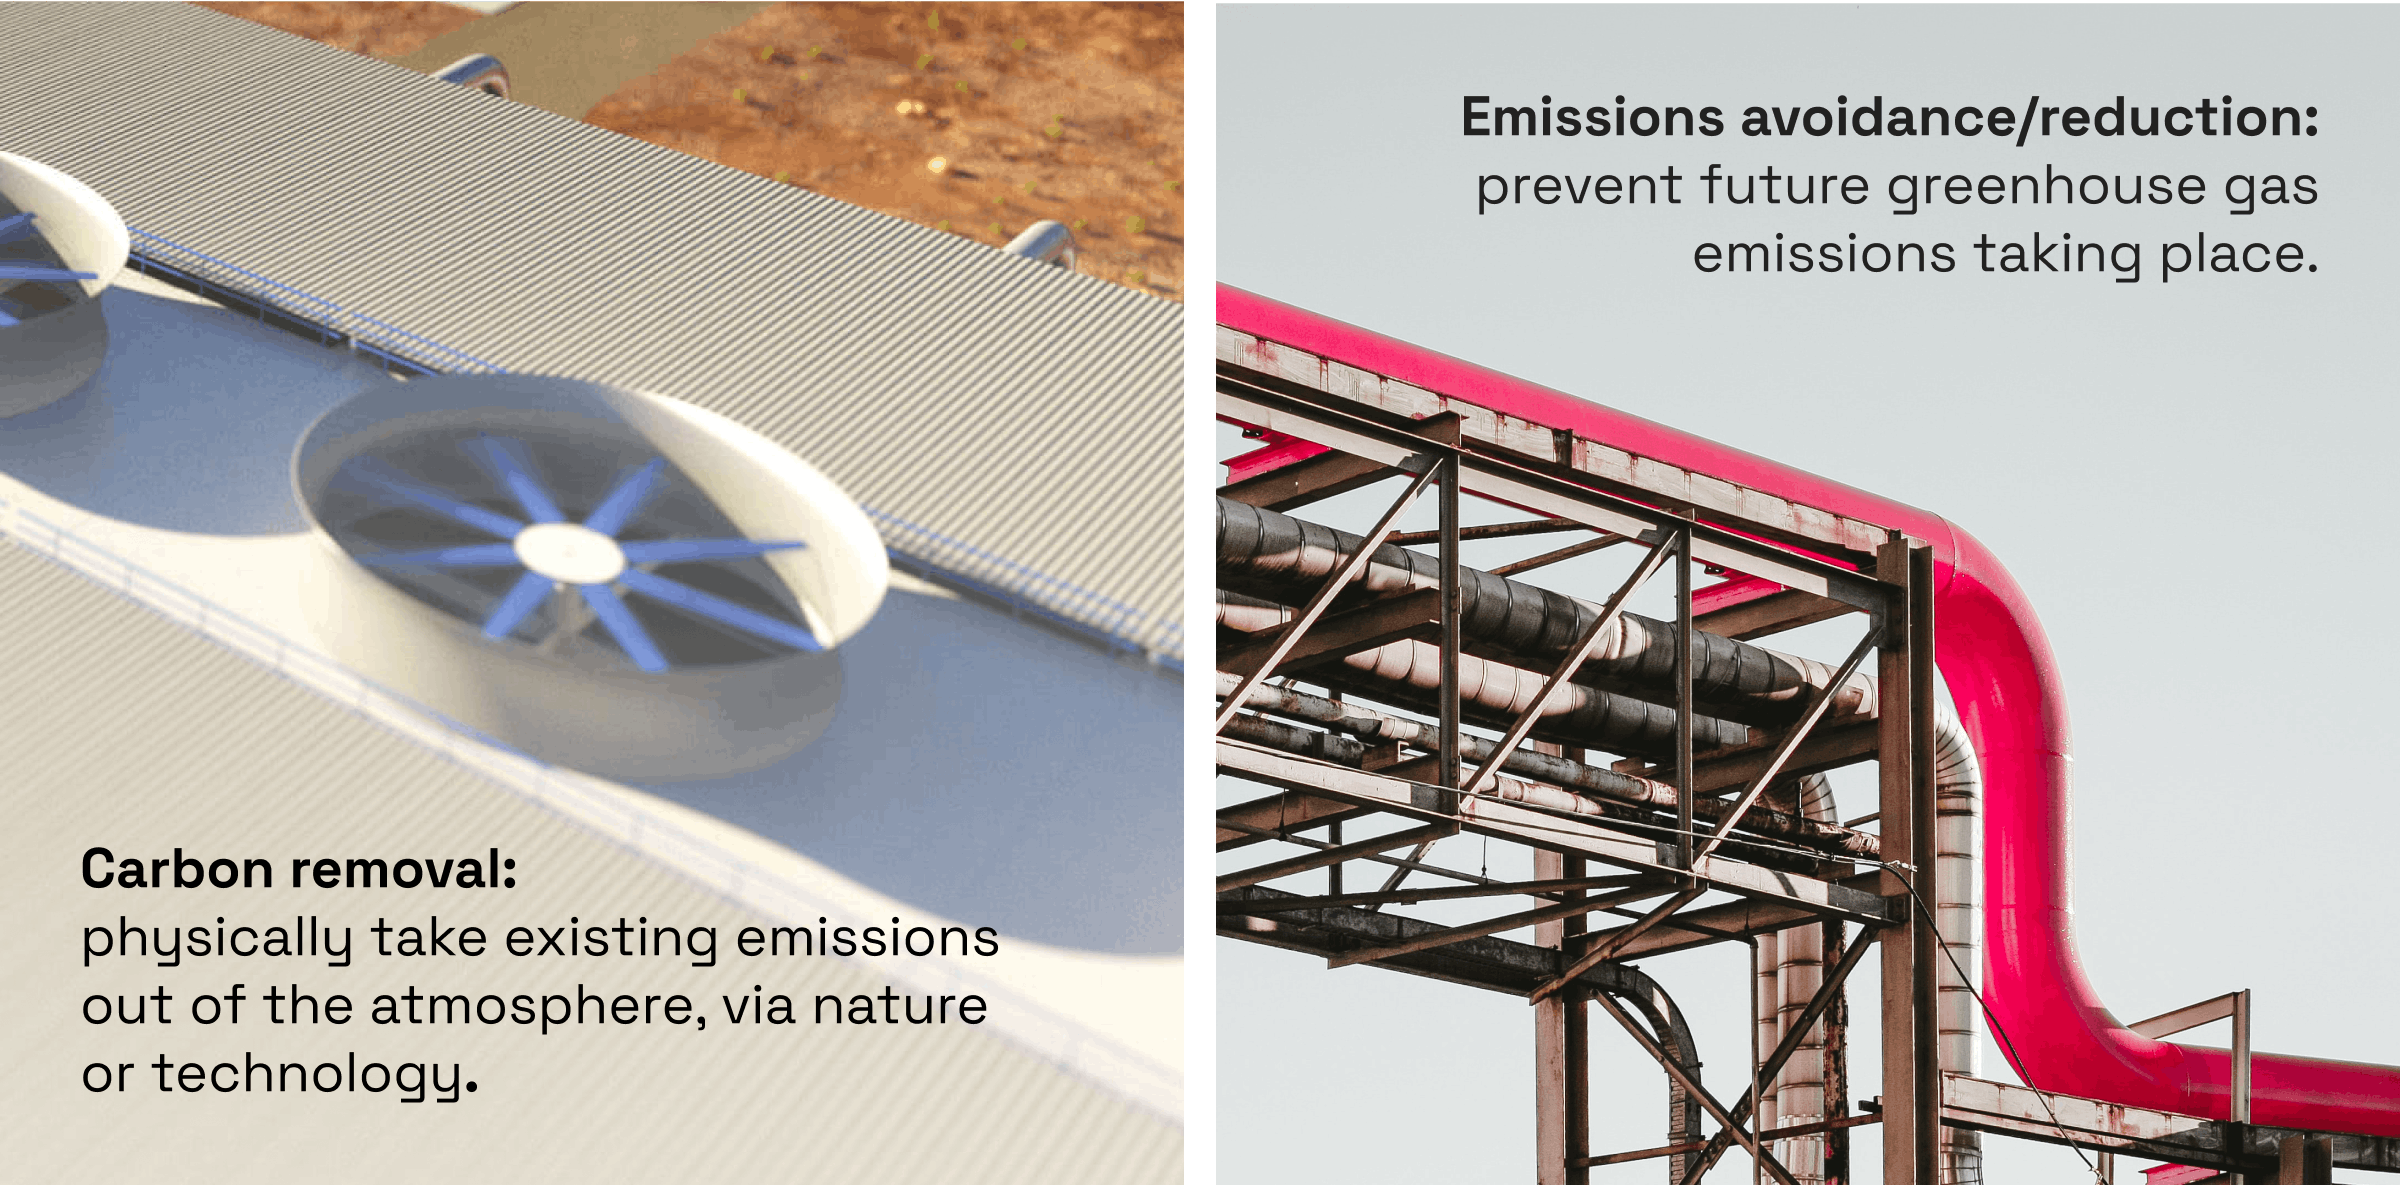 Carbon removal: physically take exisring emissions out of the atmosphere, via nature or technology. Emissions avoidance/reduction: prevent future greenhouse gas emissions taking place.